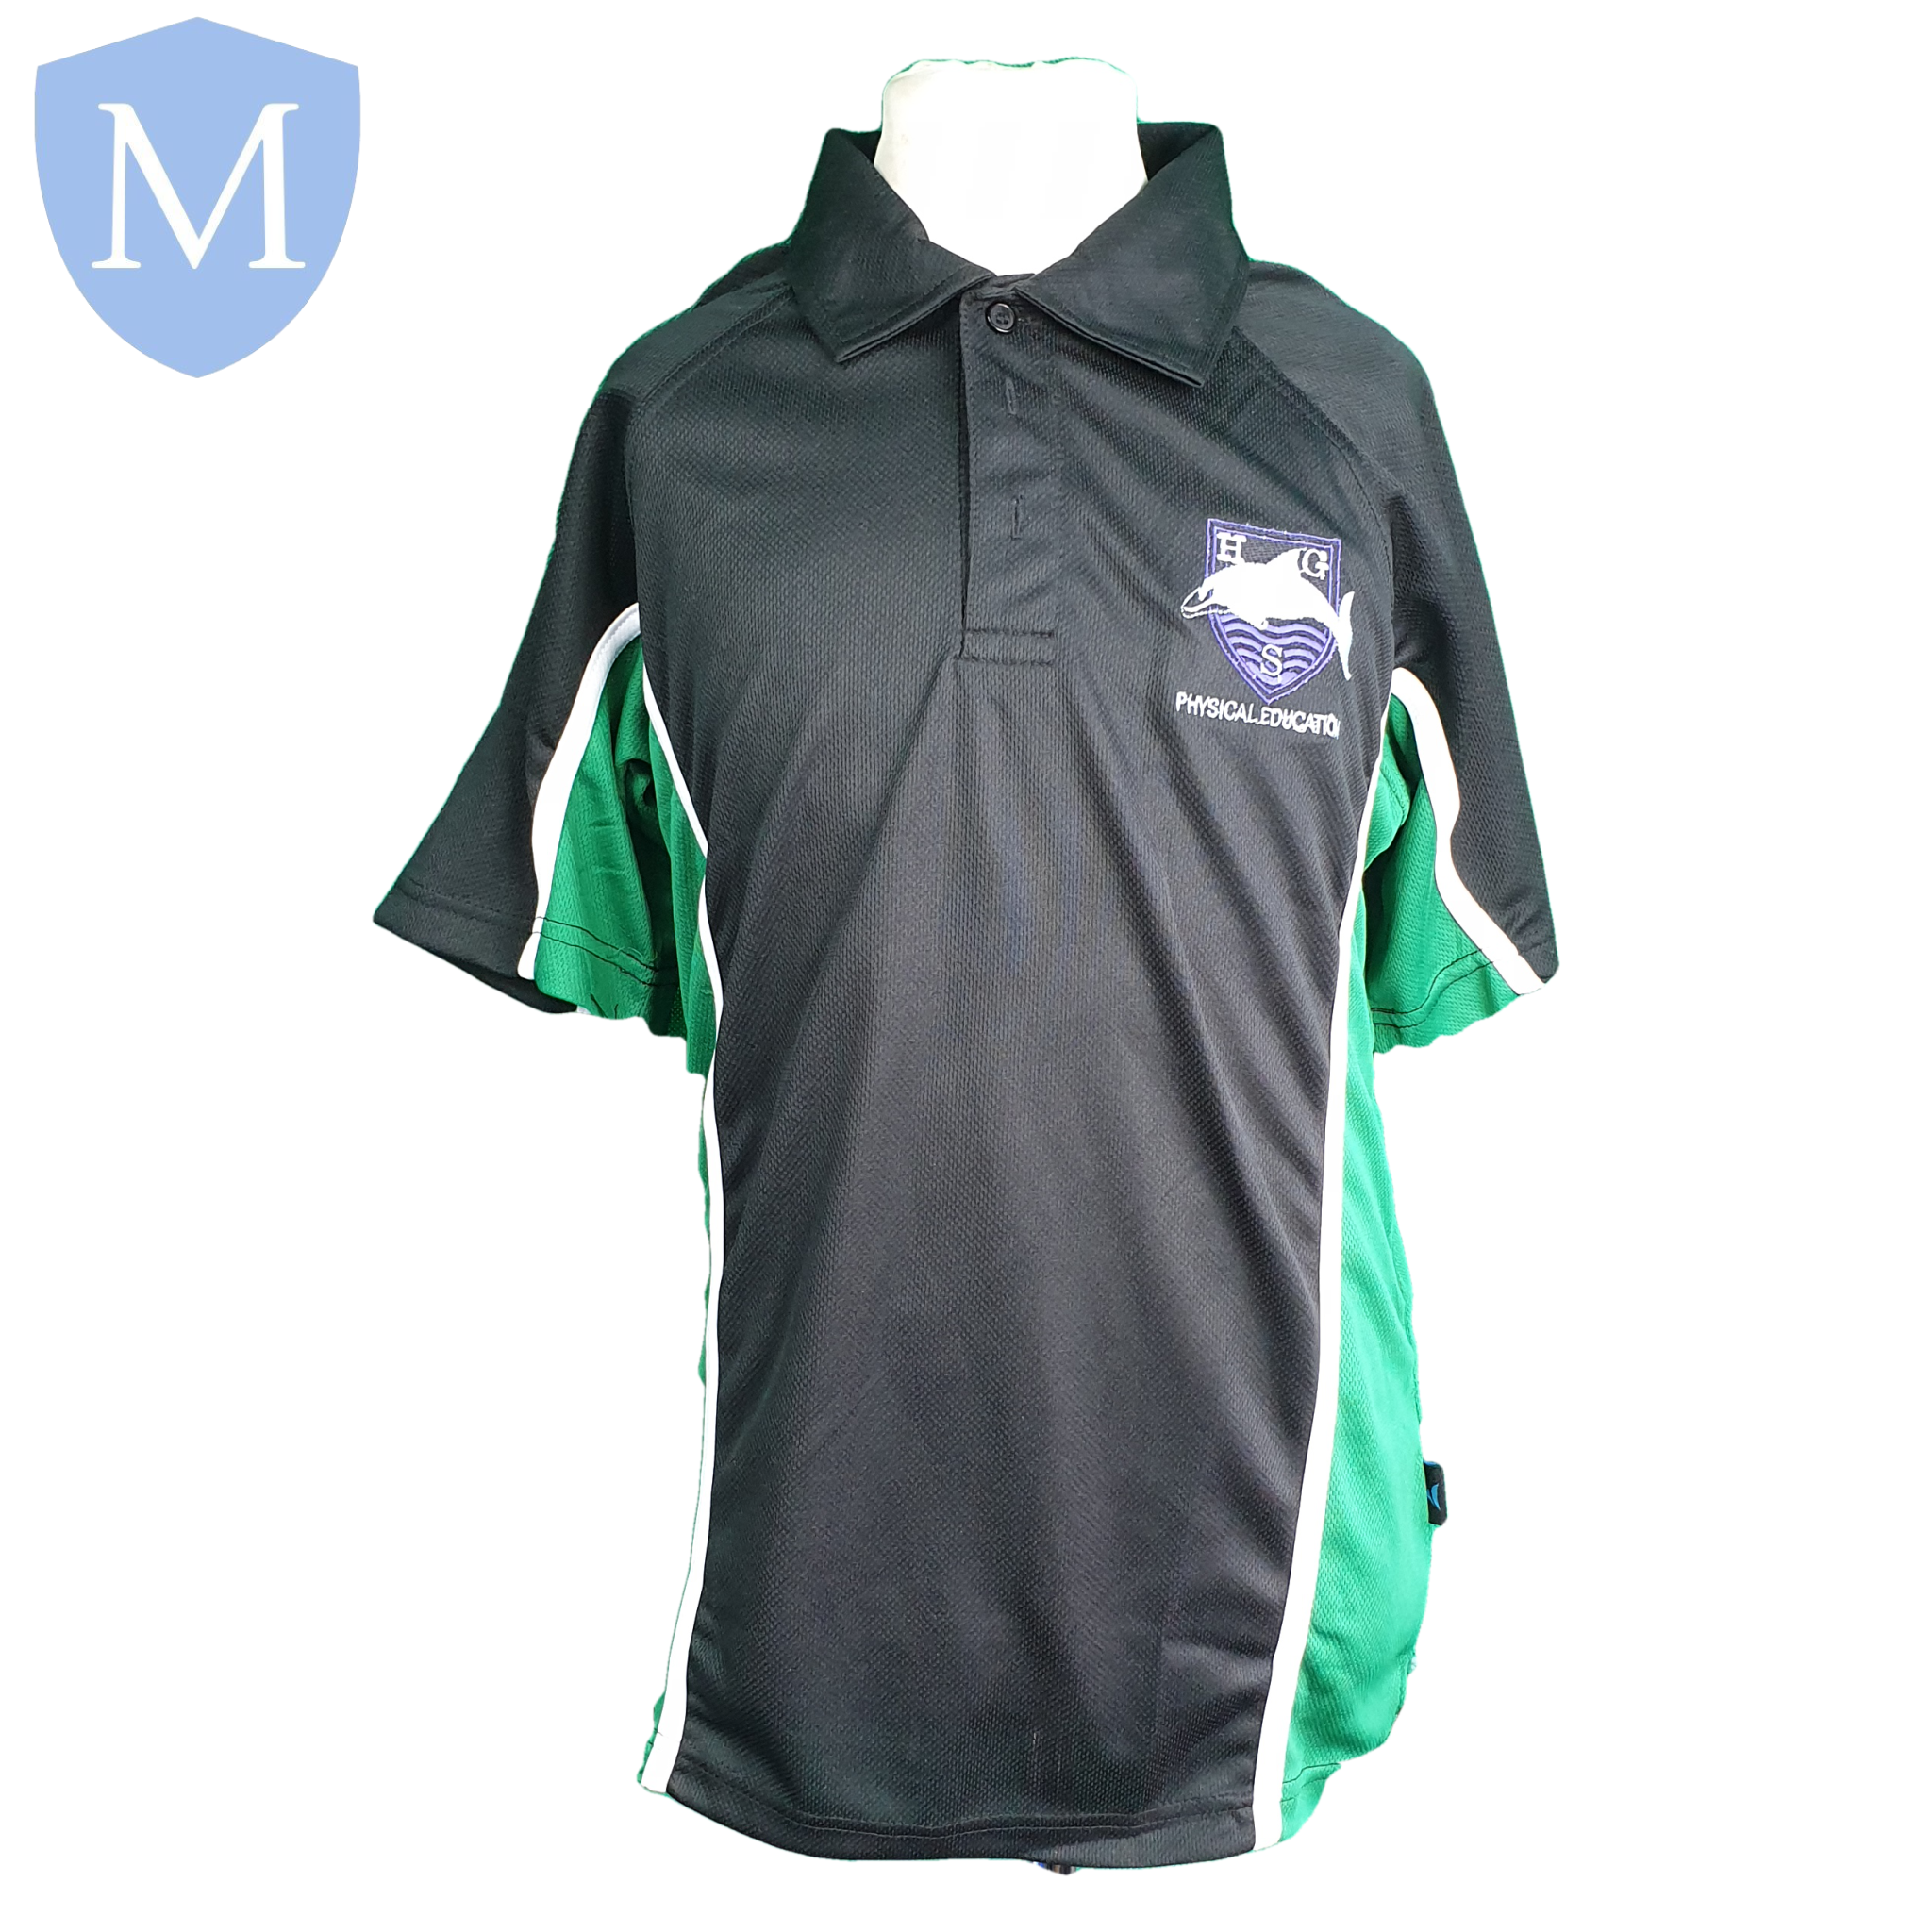 Hall Green Secondary Sports Polo - Green (Unisex) 30-32 (XS - 12 Years),32-34 (Small - 13 Years),34-36 (Medium - 14 Years),38-40 (large 15-16 Years),42-44 (X-Large),46-48 (XXL),50-52 (XXXL)